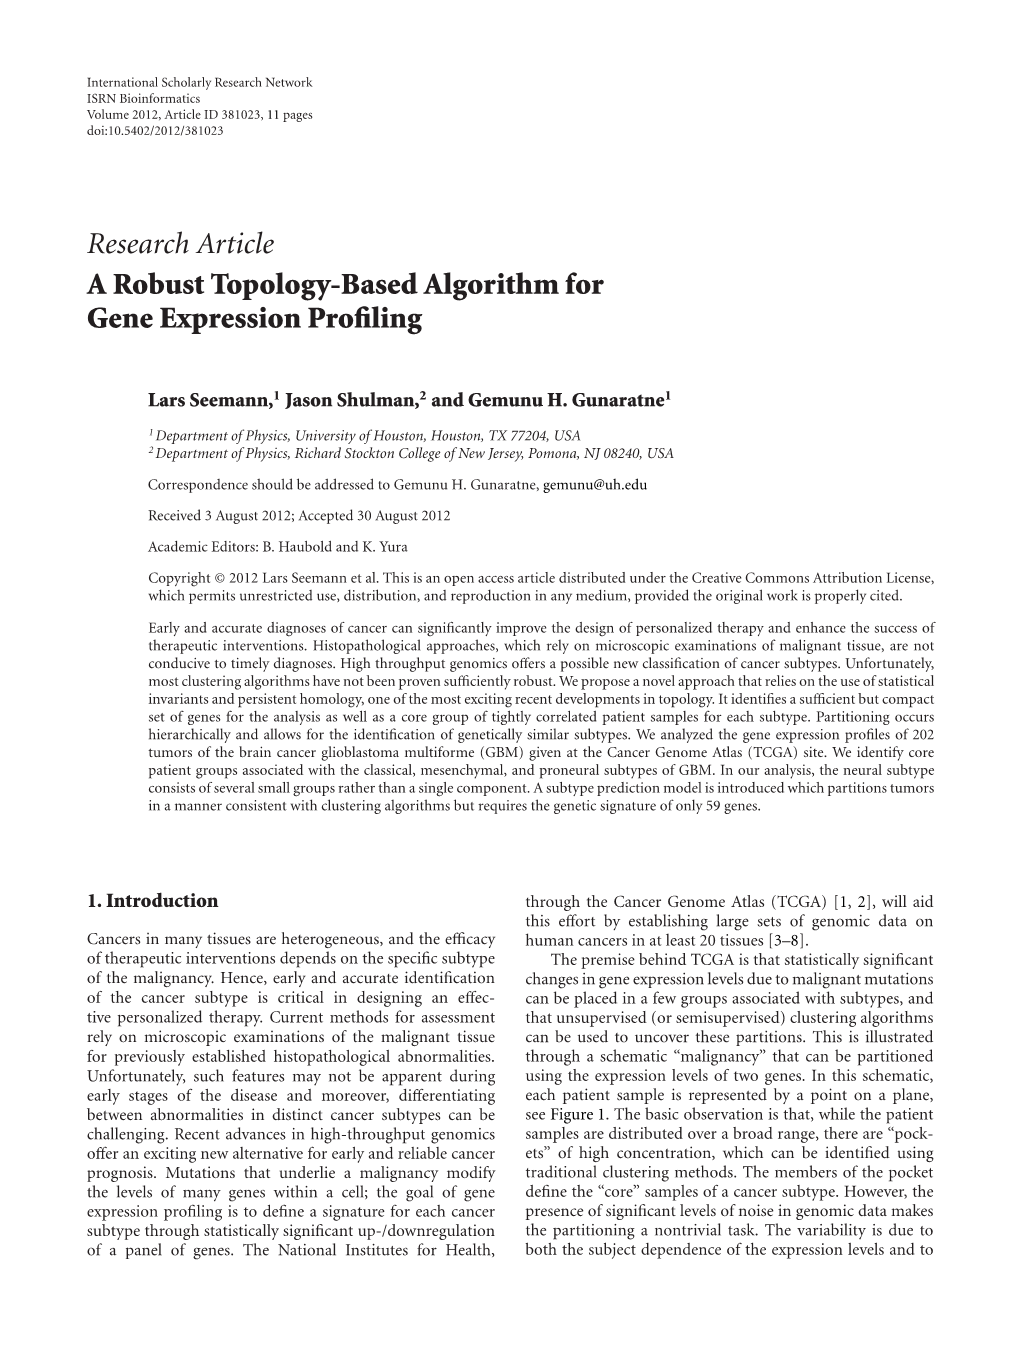 Research Article a Robust Topology-Based Algorithm for Gene Expression Proﬁling